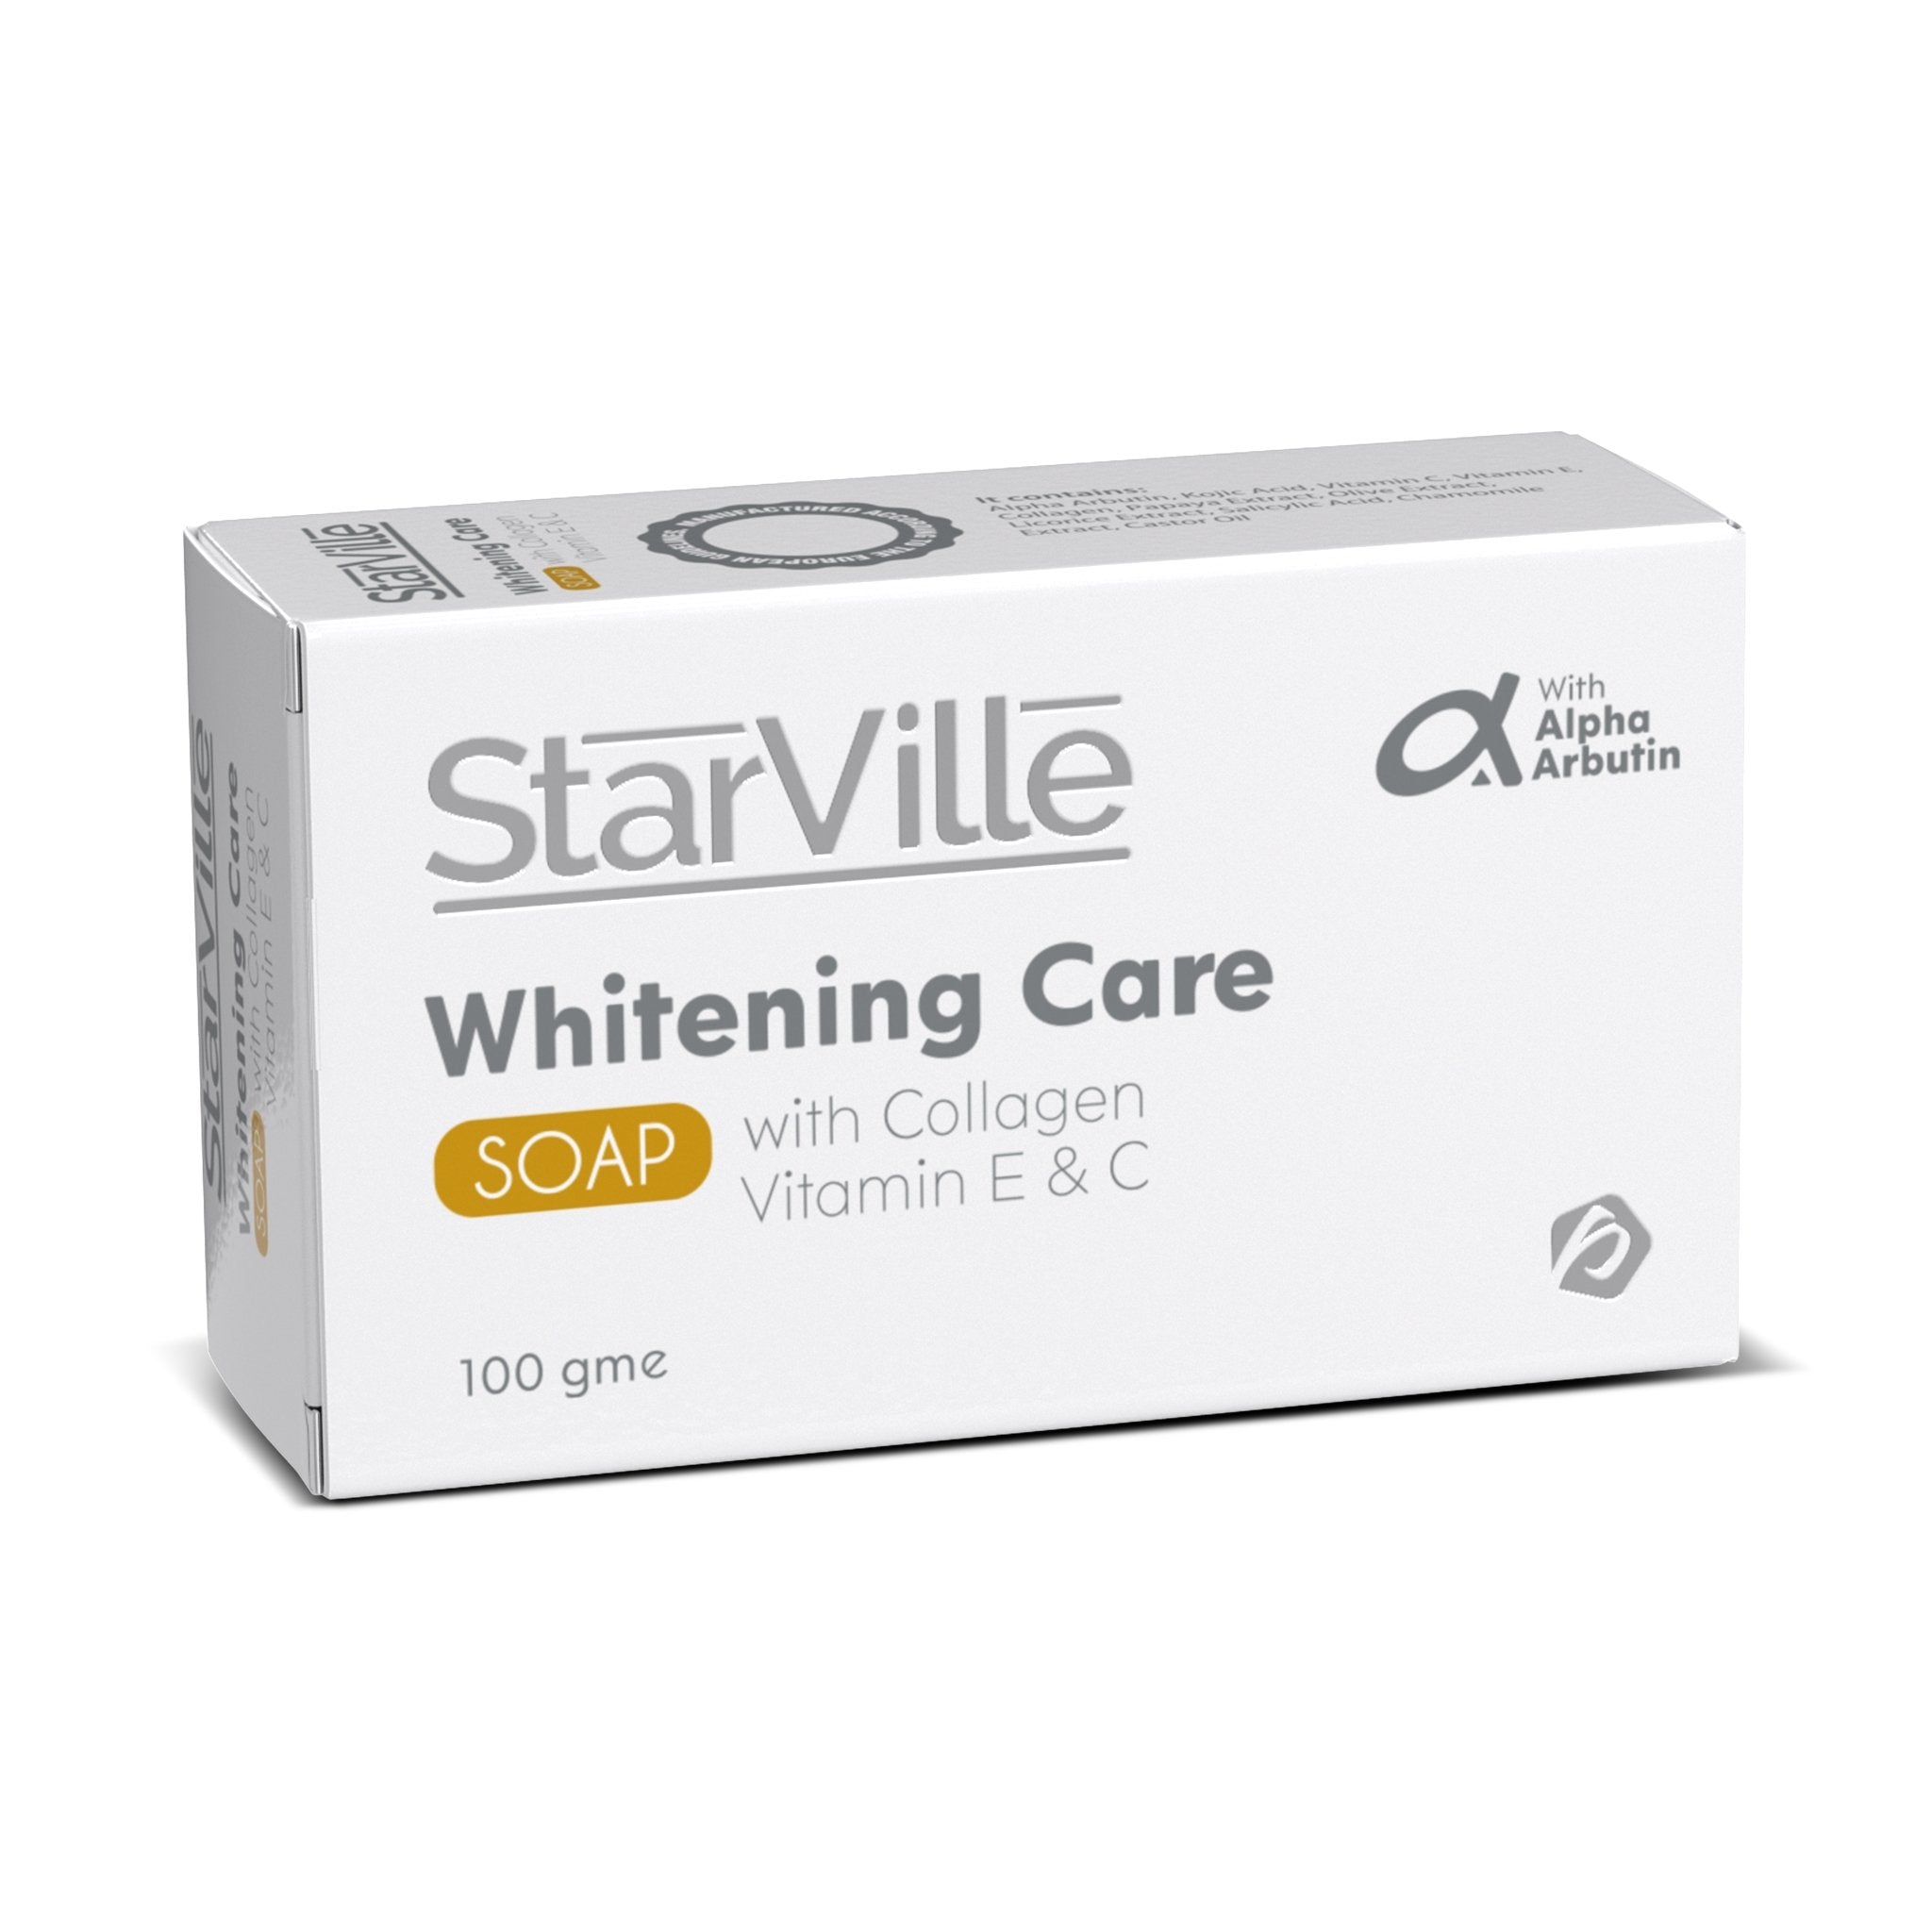 Starville Whitening Care Soap 100 gm